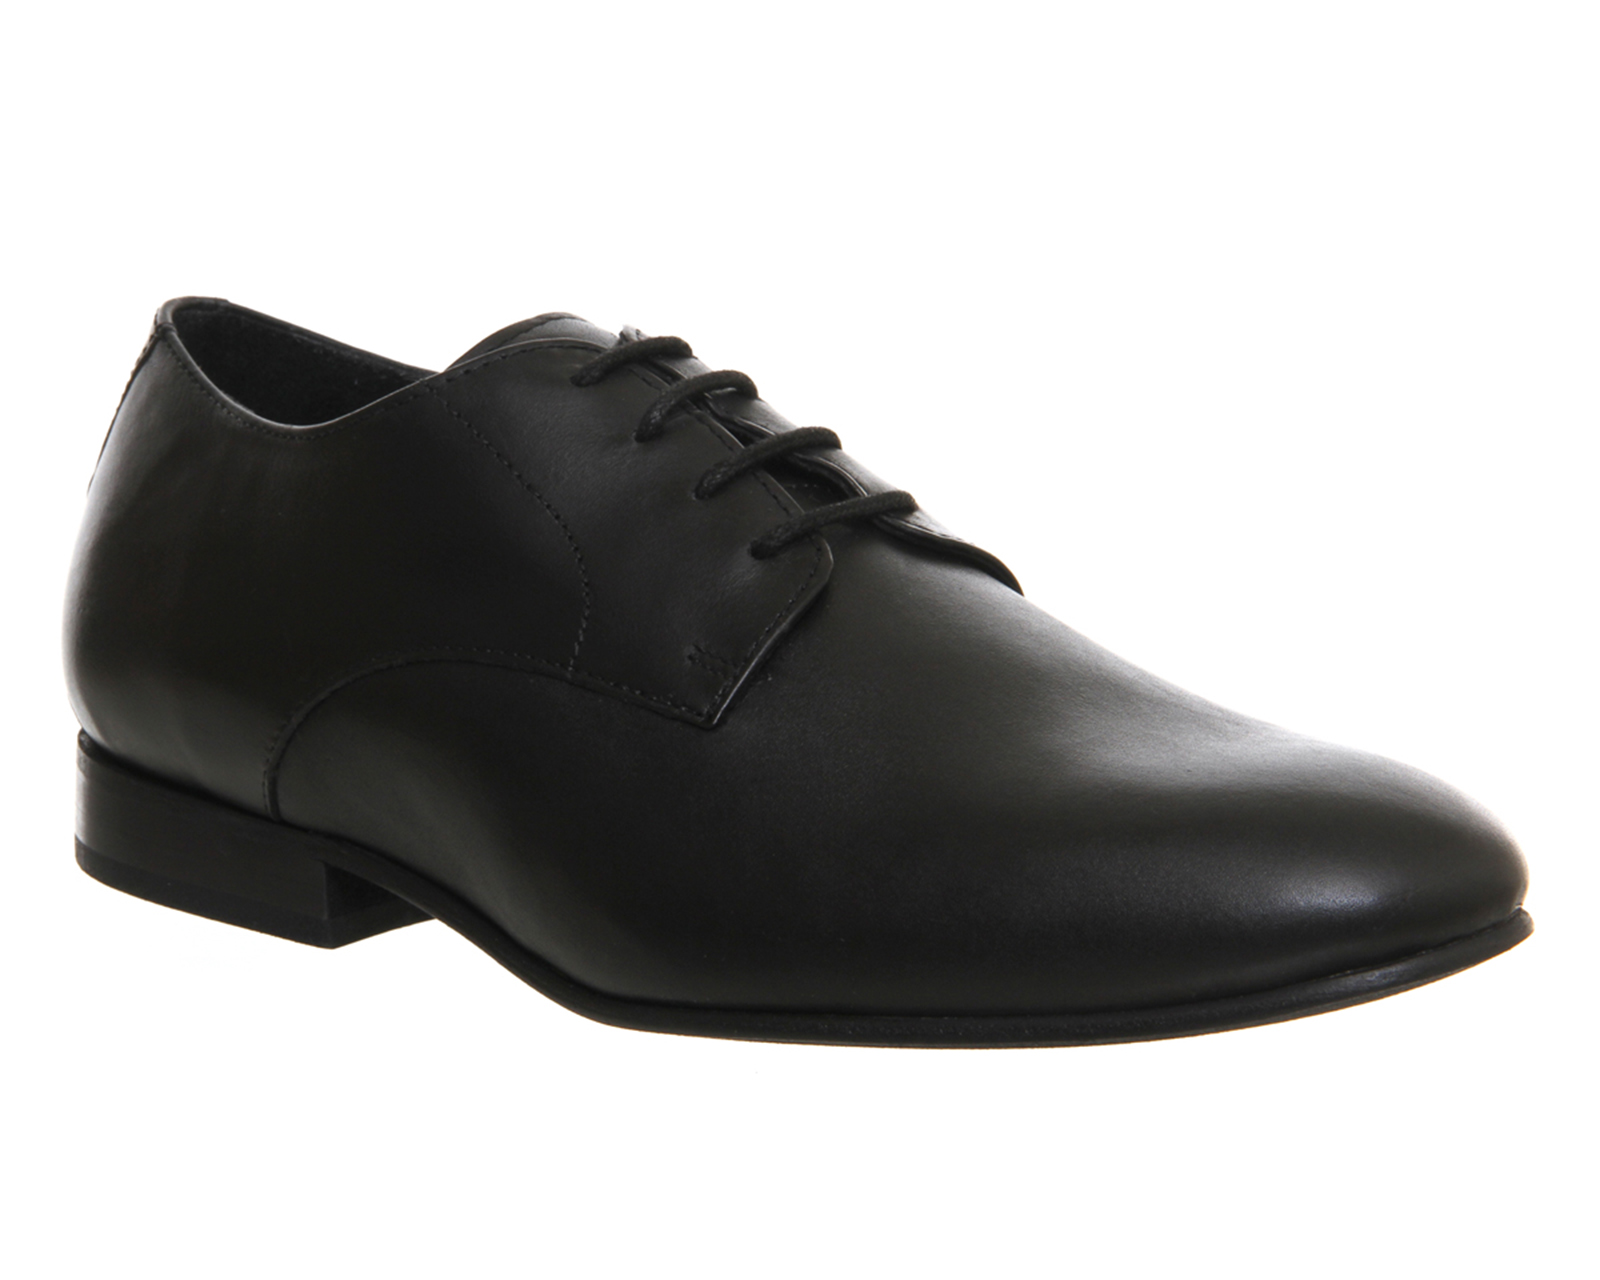 OFFICEBrody Gibson Lace Up ShoesBlack Leather